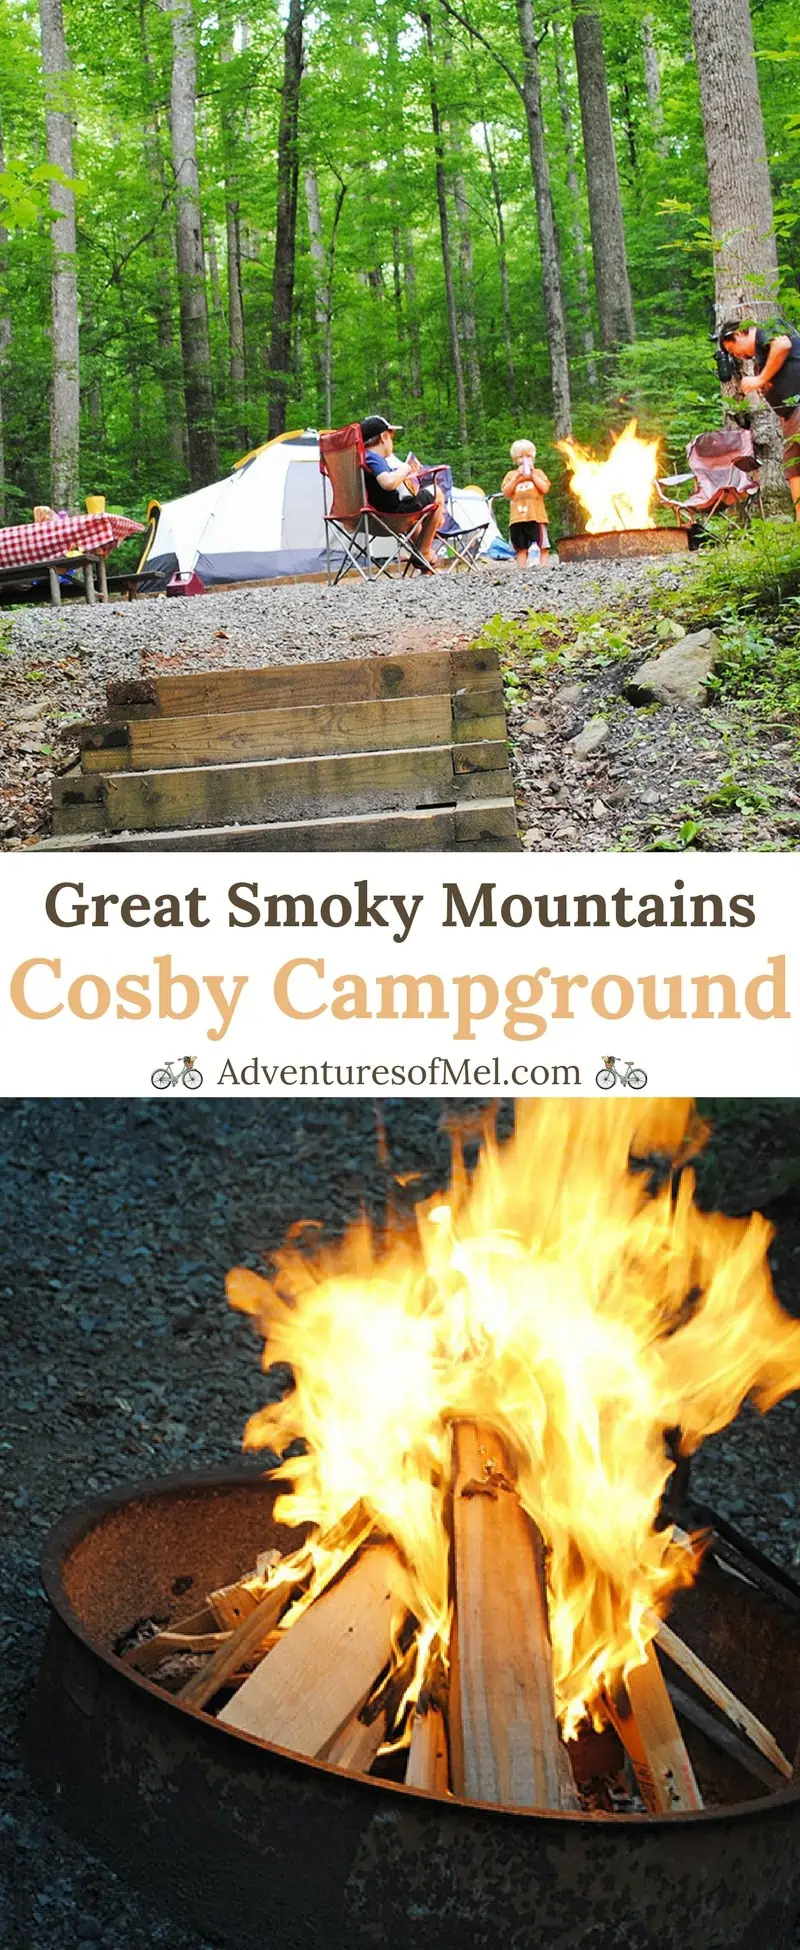 Great Smoky Mountains Cosby Campground